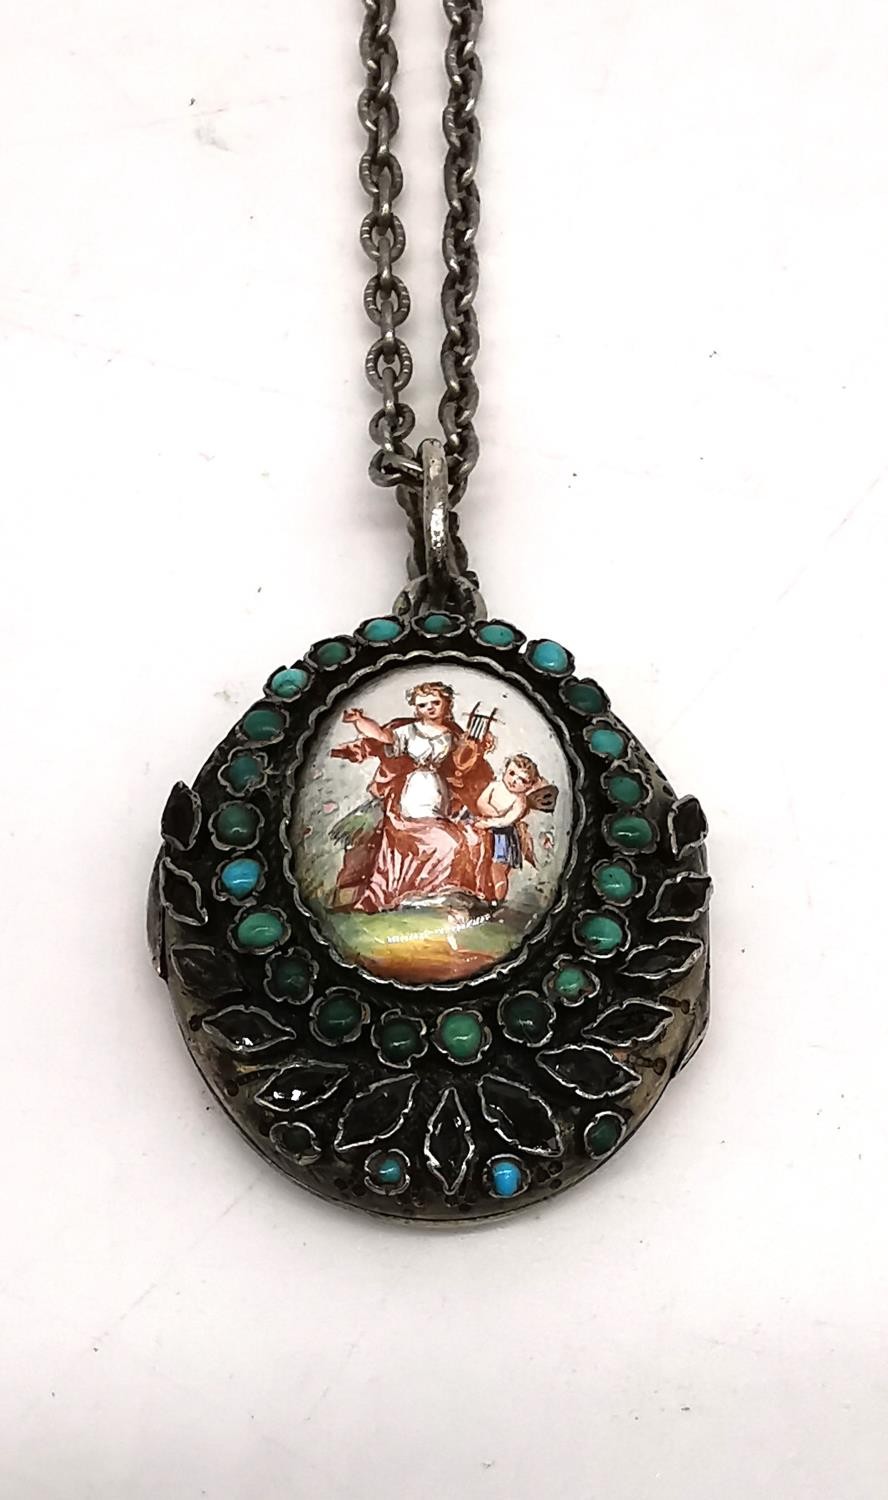 A 19th century white metal locket and metal chain. The front of the locket with an enamel plaque